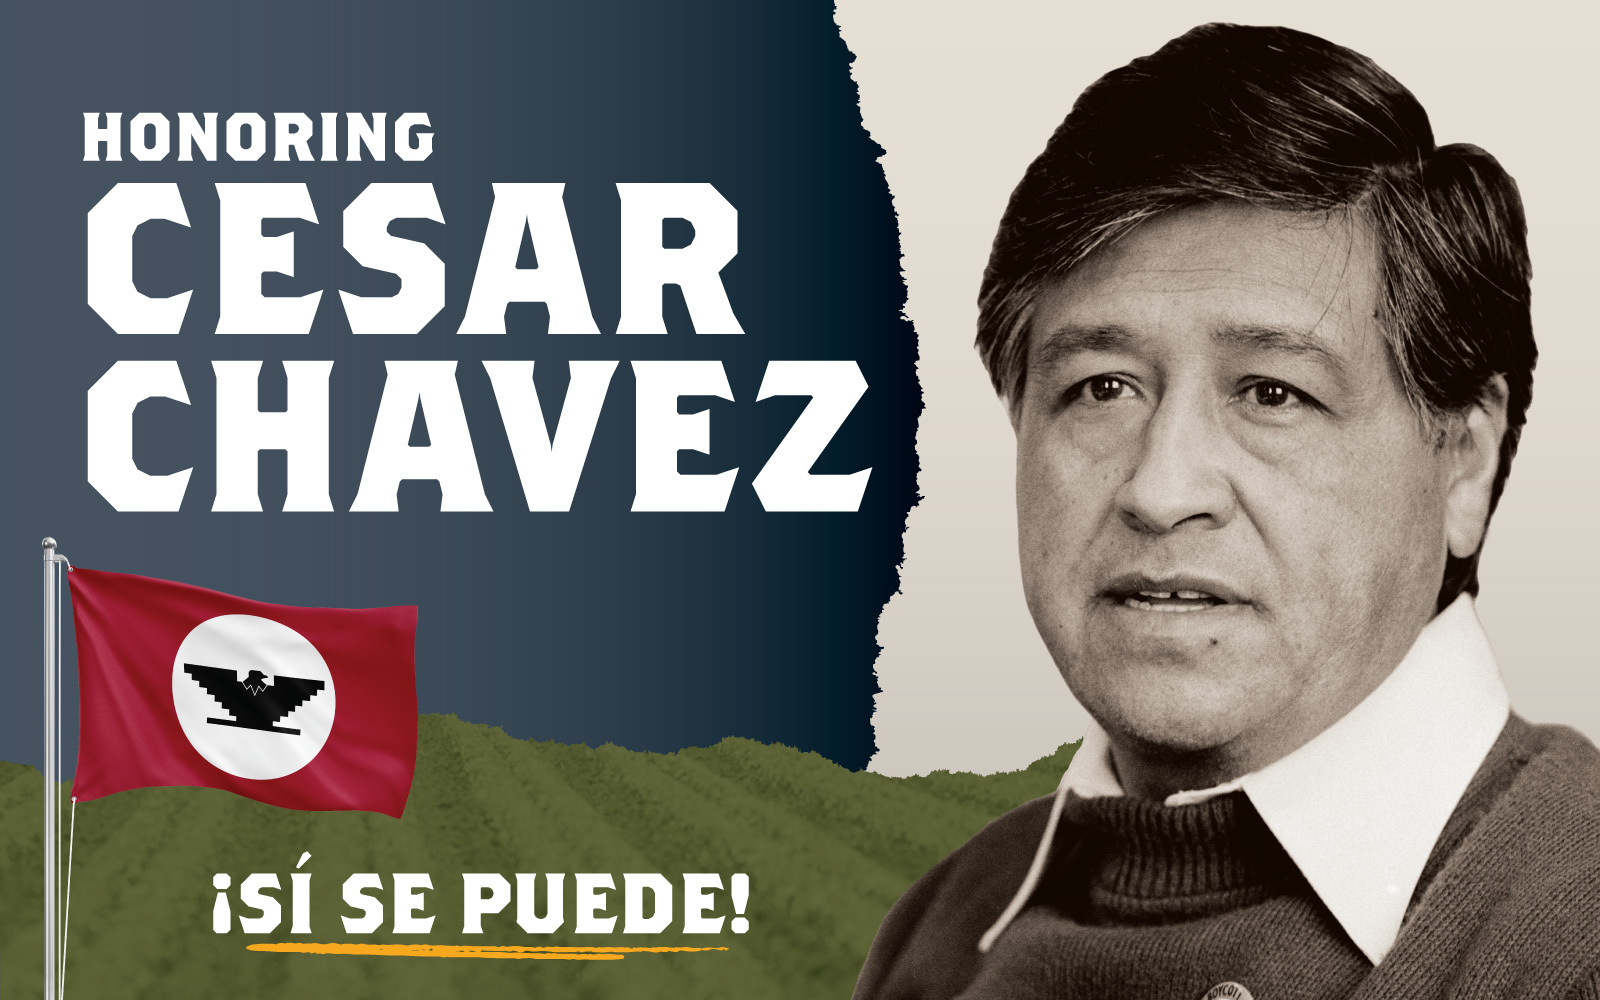 photo of Cesar Chavez with the words Honoring Cesar Chavez, sí se puede!